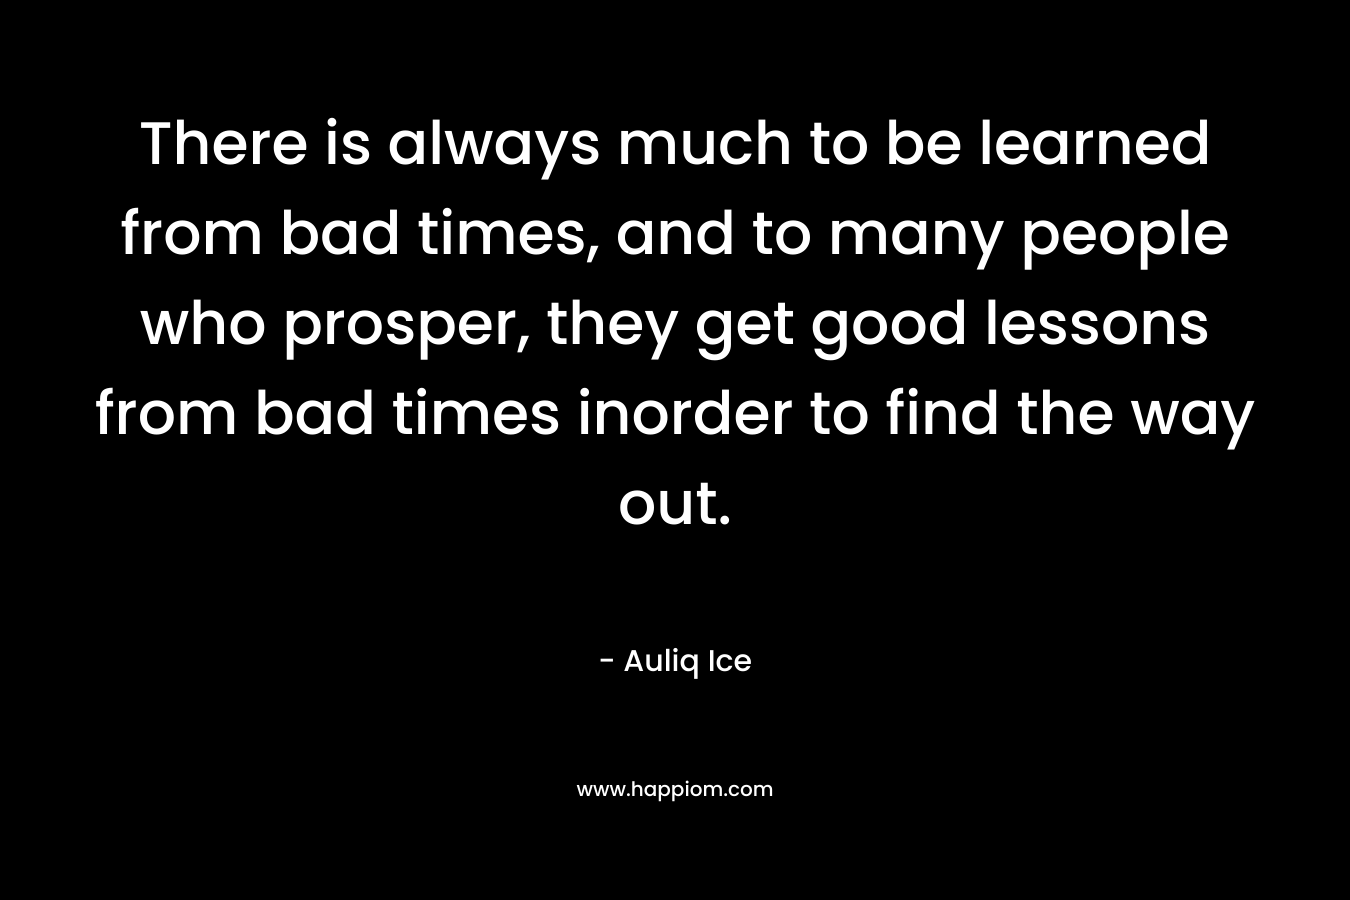 There is always much to be learned from bad times, and to many people who prosper, they get good lessons from bad times inorder to find the way out.